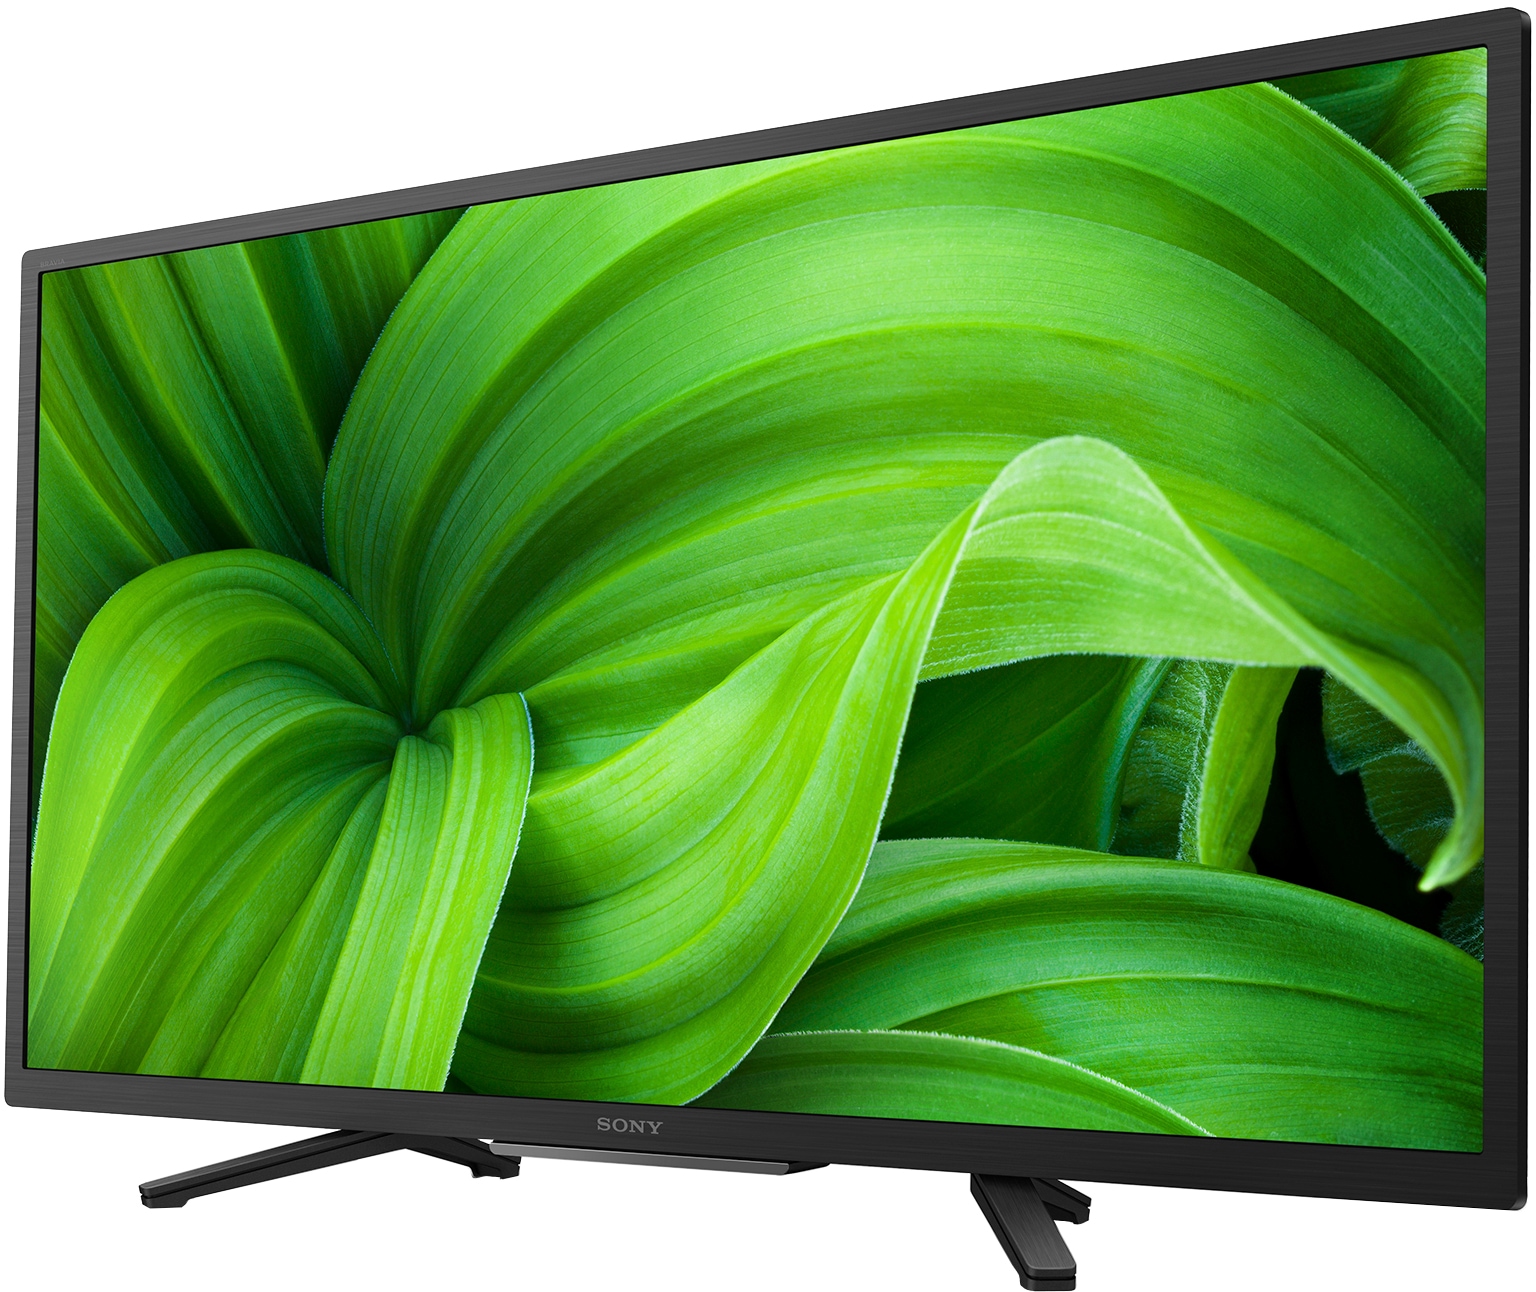 TV, bei HDR 80 »KD-32800W/1«, WXGA, OTTO Fernseher jetzt Sony Smart Tuner, cm/32 LCD-LED TV, Android Triple Heady, Zoll, BRAVIA, HD